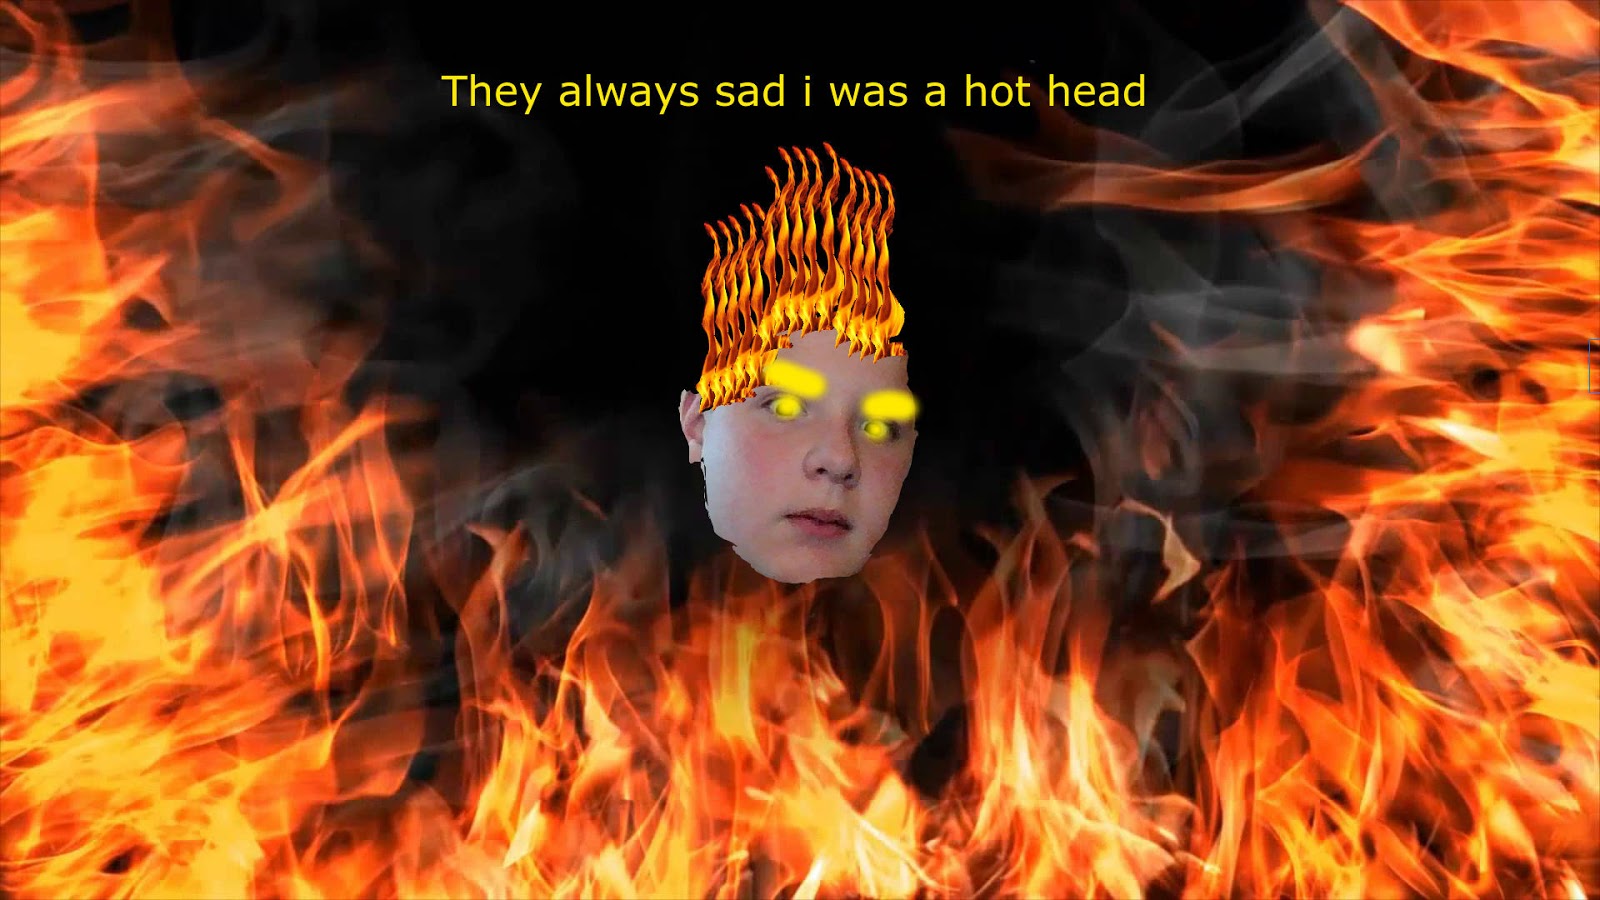 Hot head images